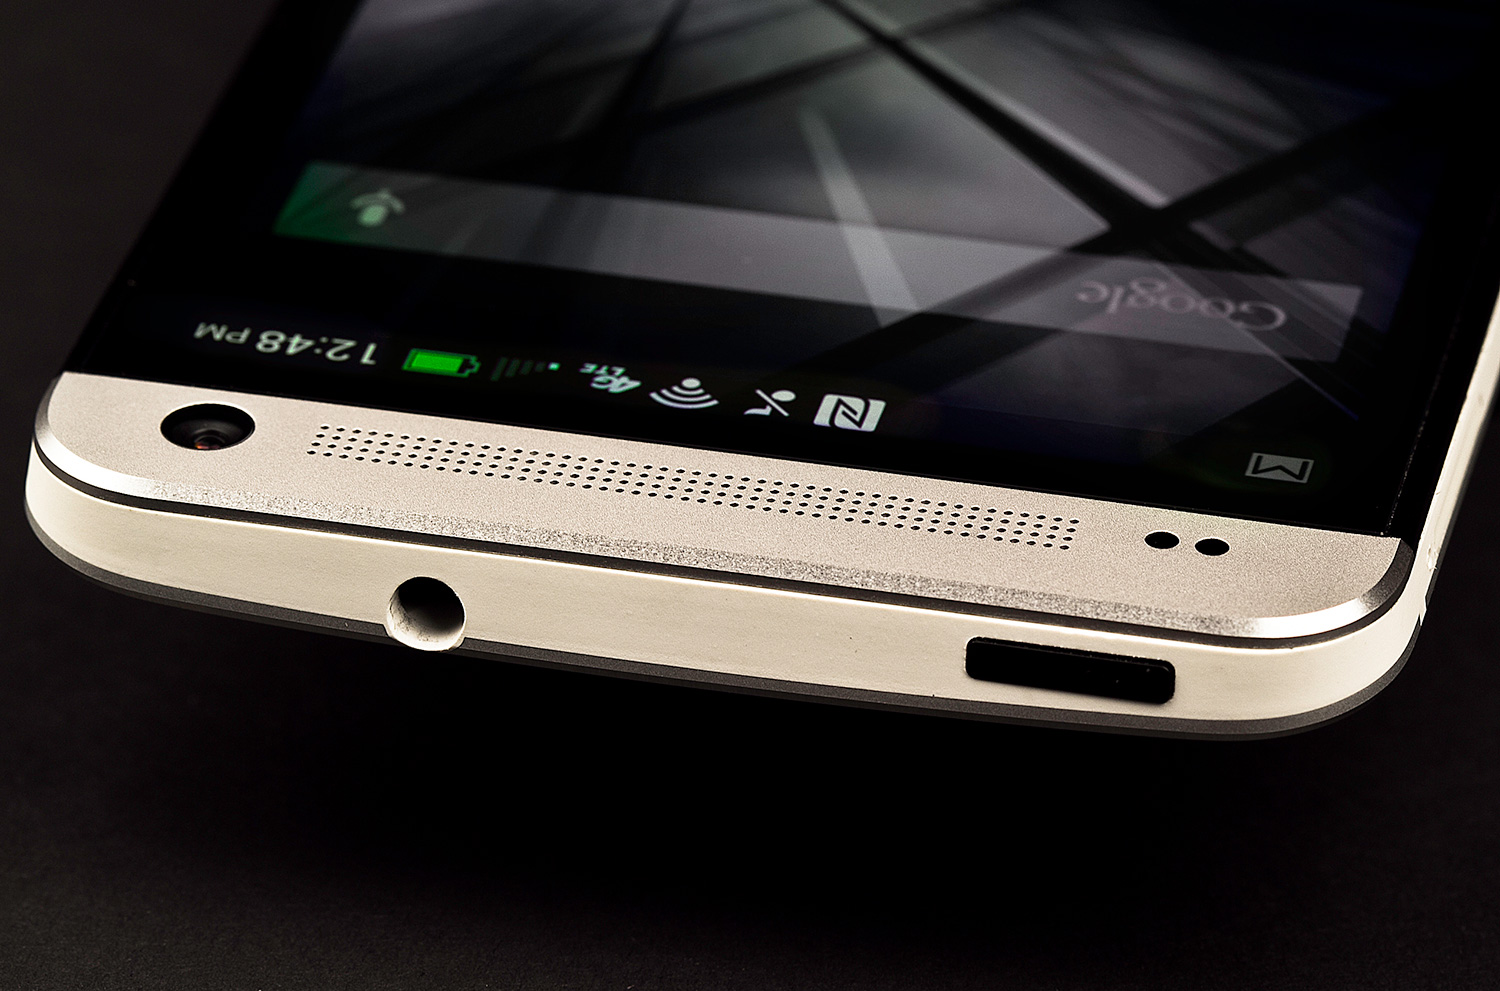 16 problems you could have with the HTC One M7, and how to fix them